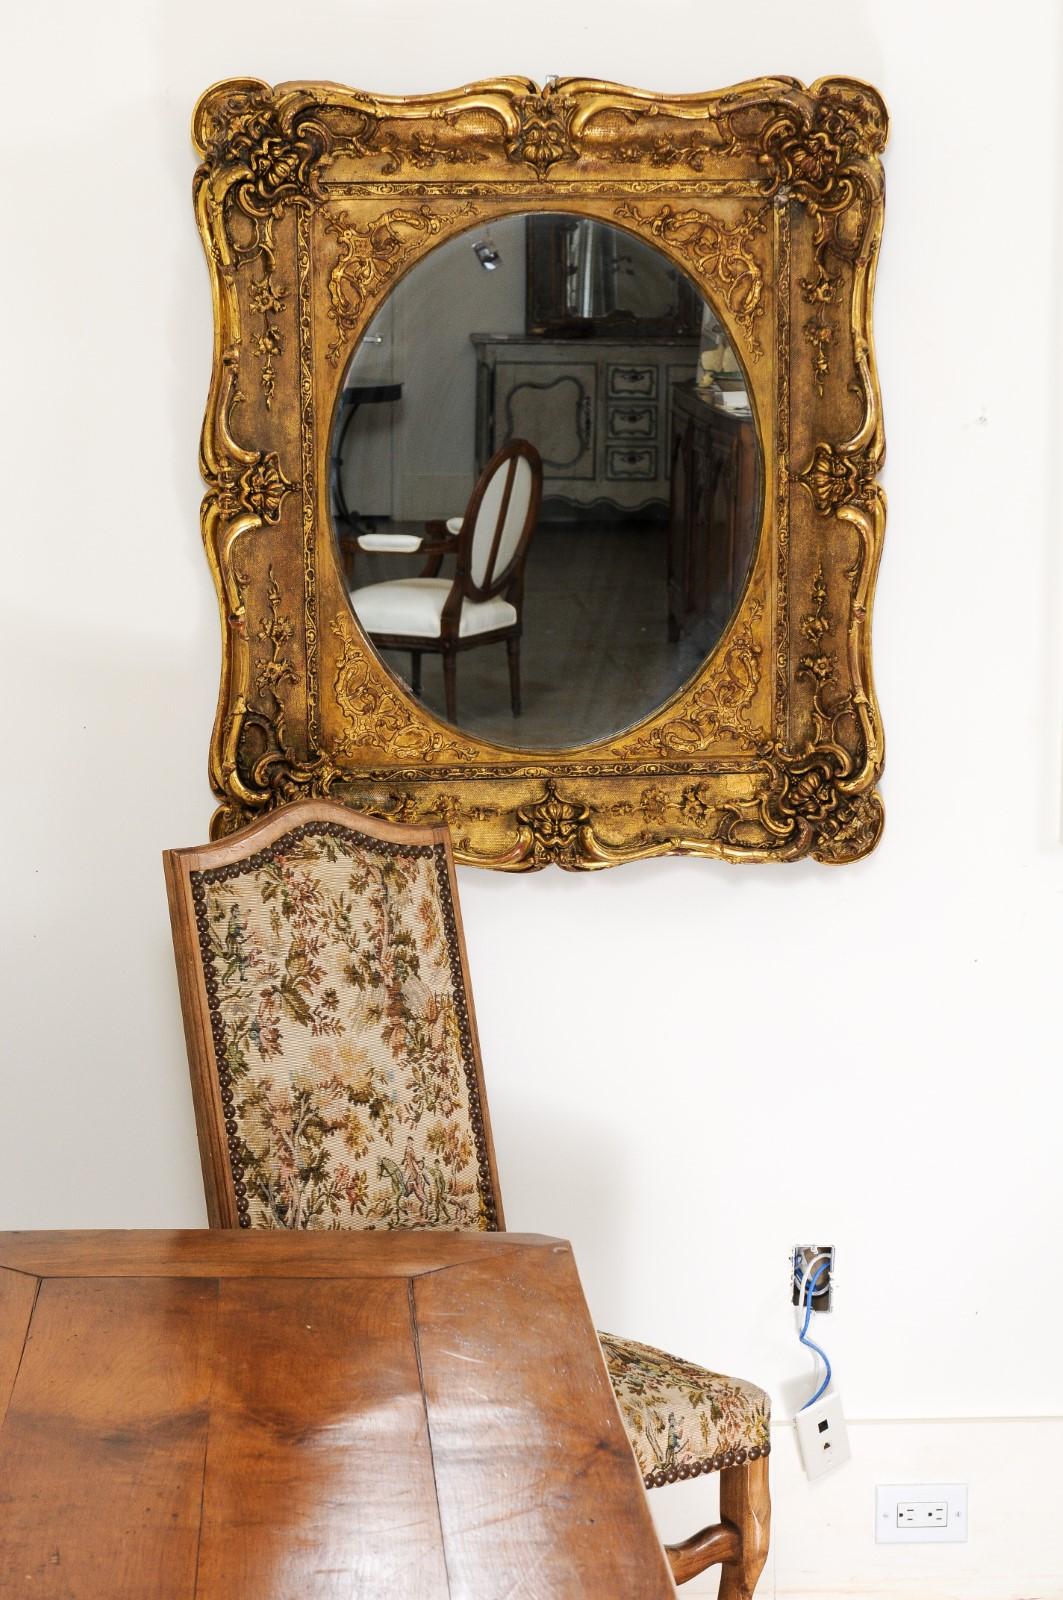 A French carved giltwood mirror from the 19th century, with scrolling foliage and delicate flowers. Created in France during the 19th century, this giltwood mirror attracts our attention with its graceful scrolling lines showcasing foliage, delicate